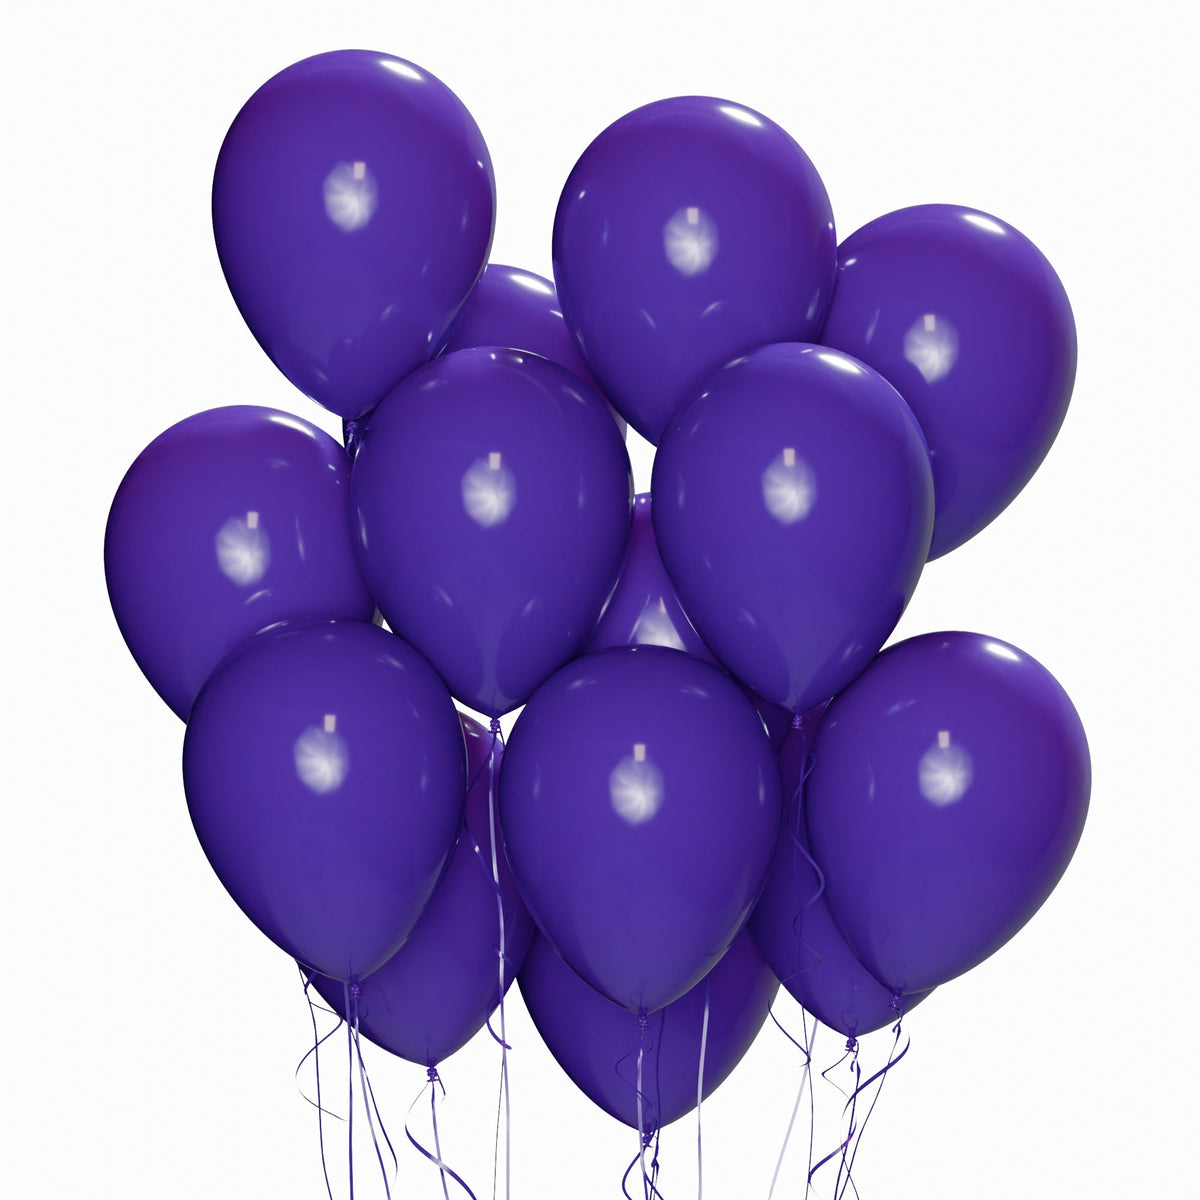 WIDE OCEAN INTERNATIONAL TRADE BEIJING CO., LTD Balloons Violet Latex Balloon, 12 Inches, 15 Count 810077657638